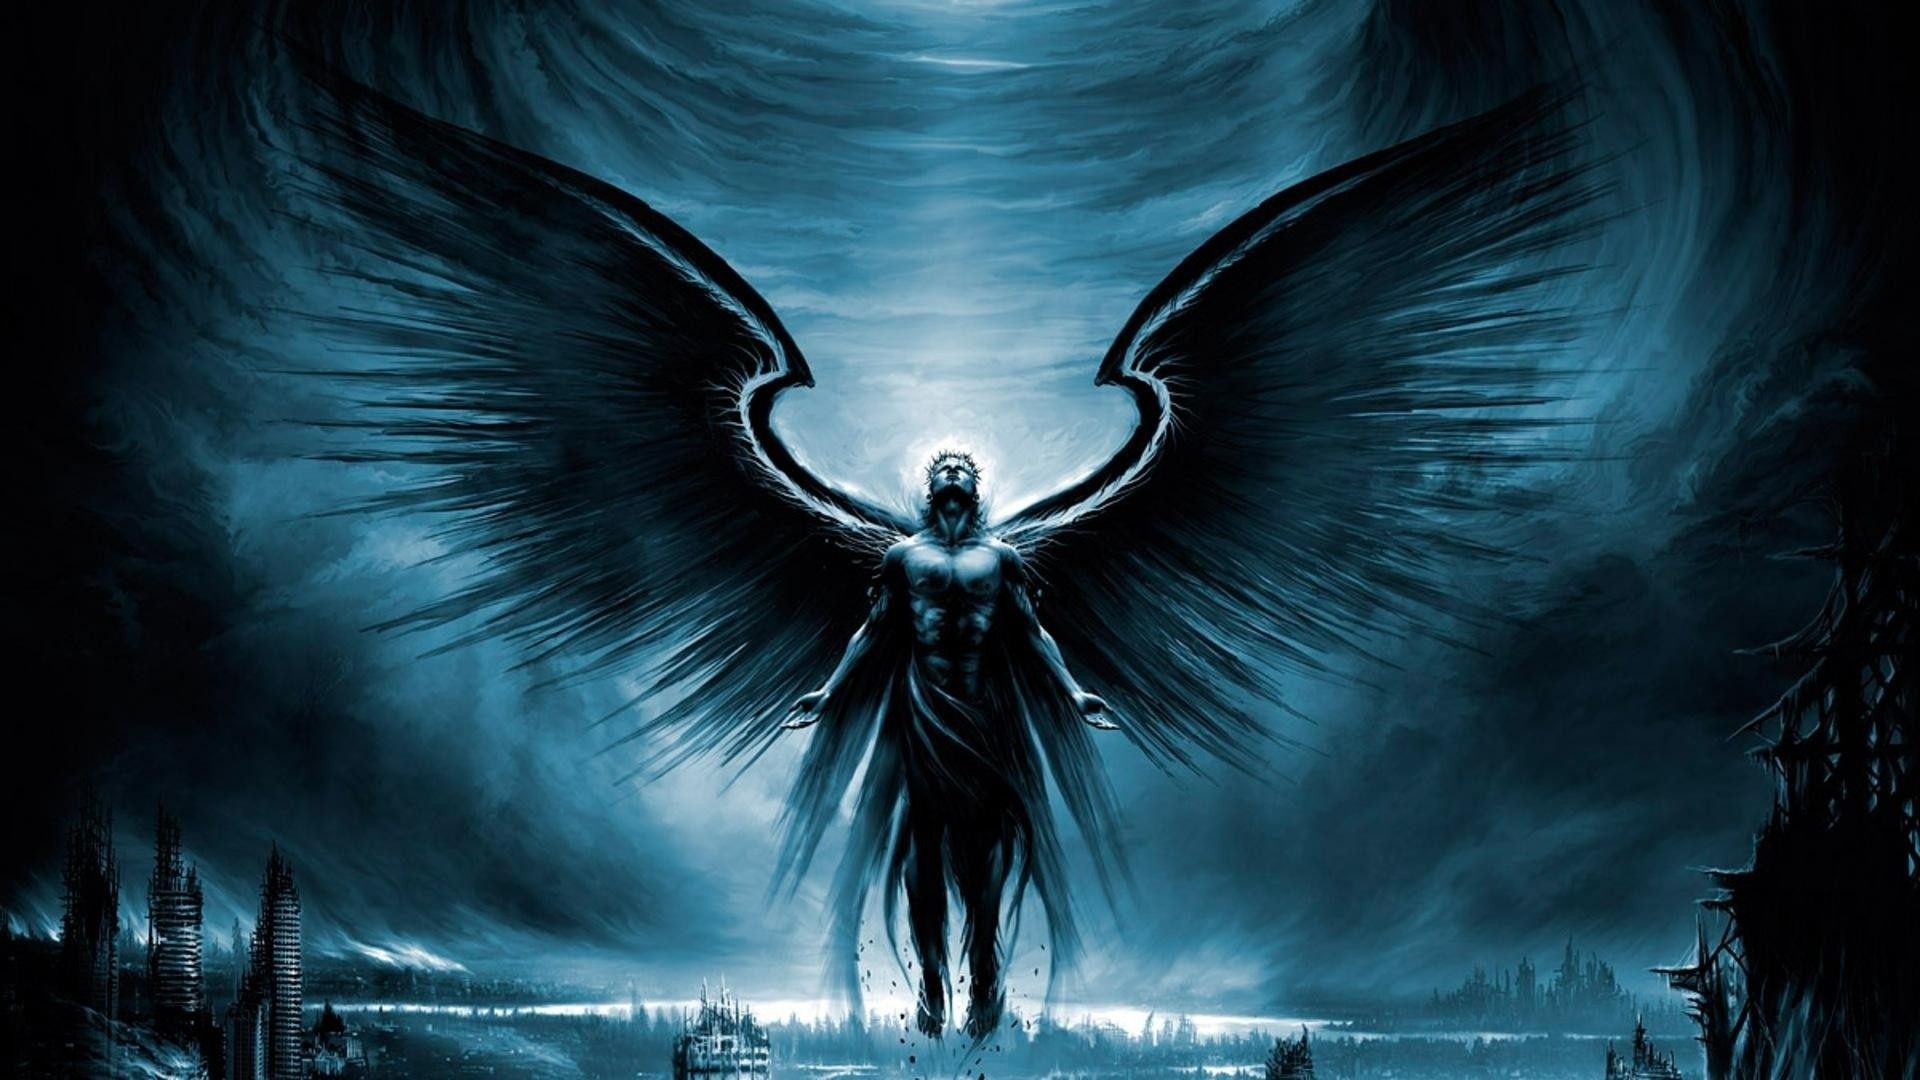 A dark angel with wings and horns - Greek mythology